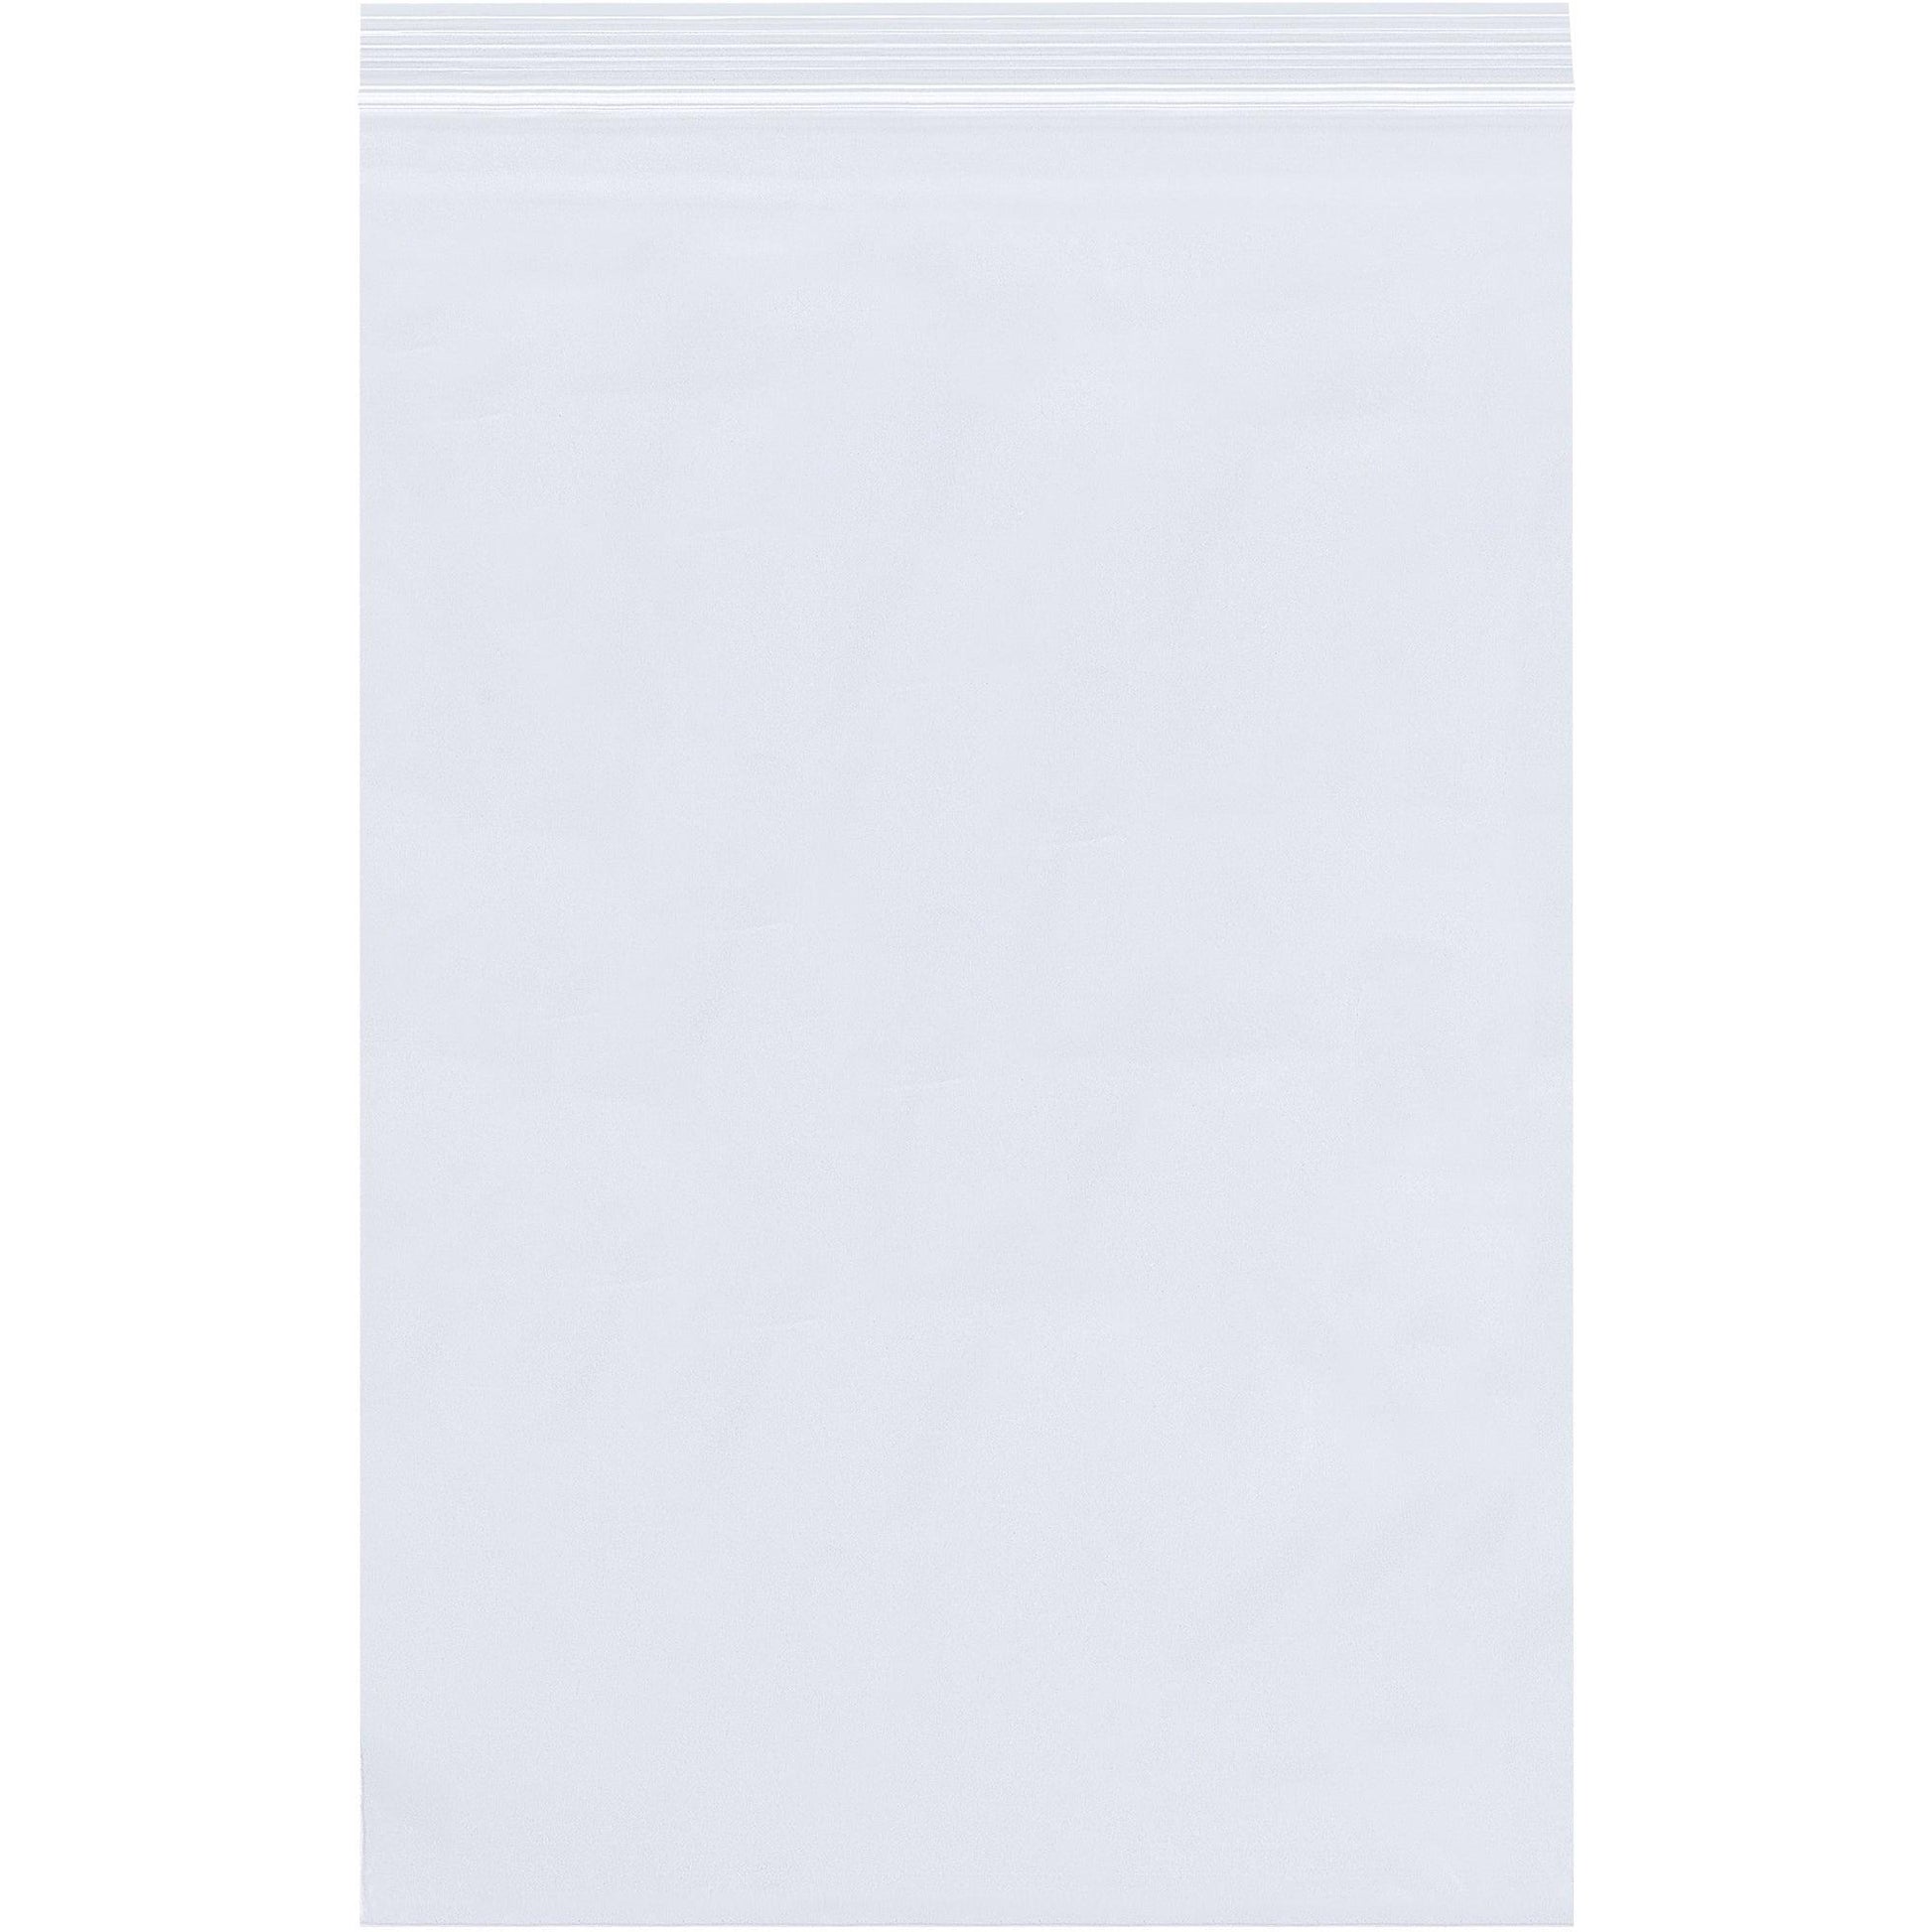 5 x 10" - 6 Mil Reclosable Poly Bags - PB3869